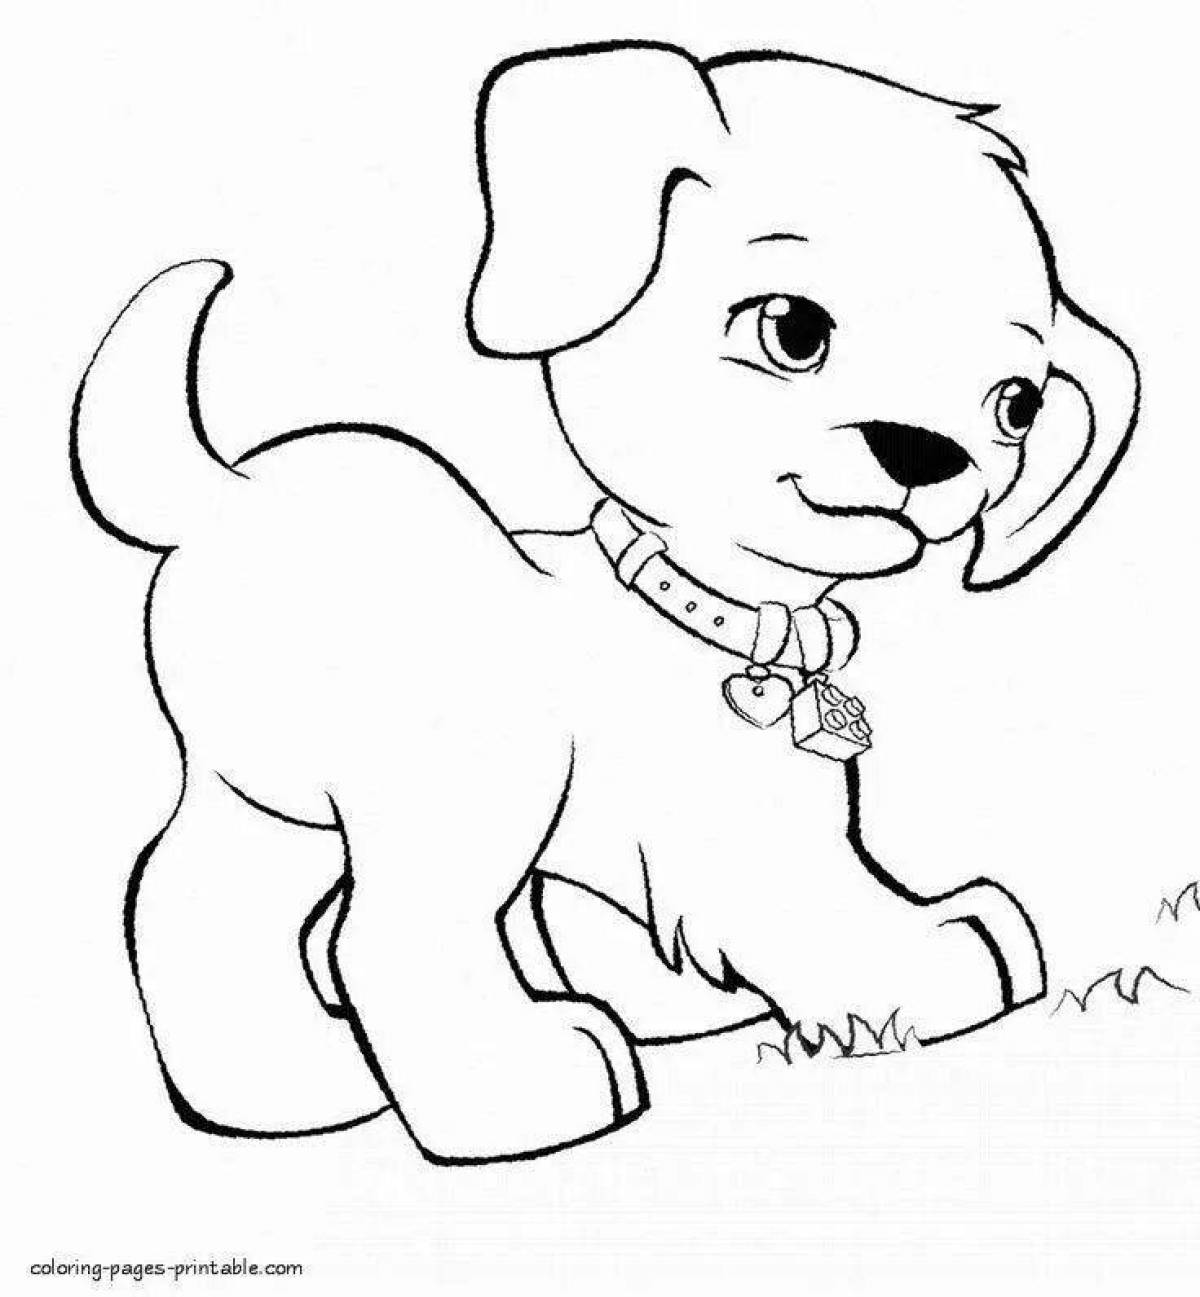 Impressive coloring picture of a dog